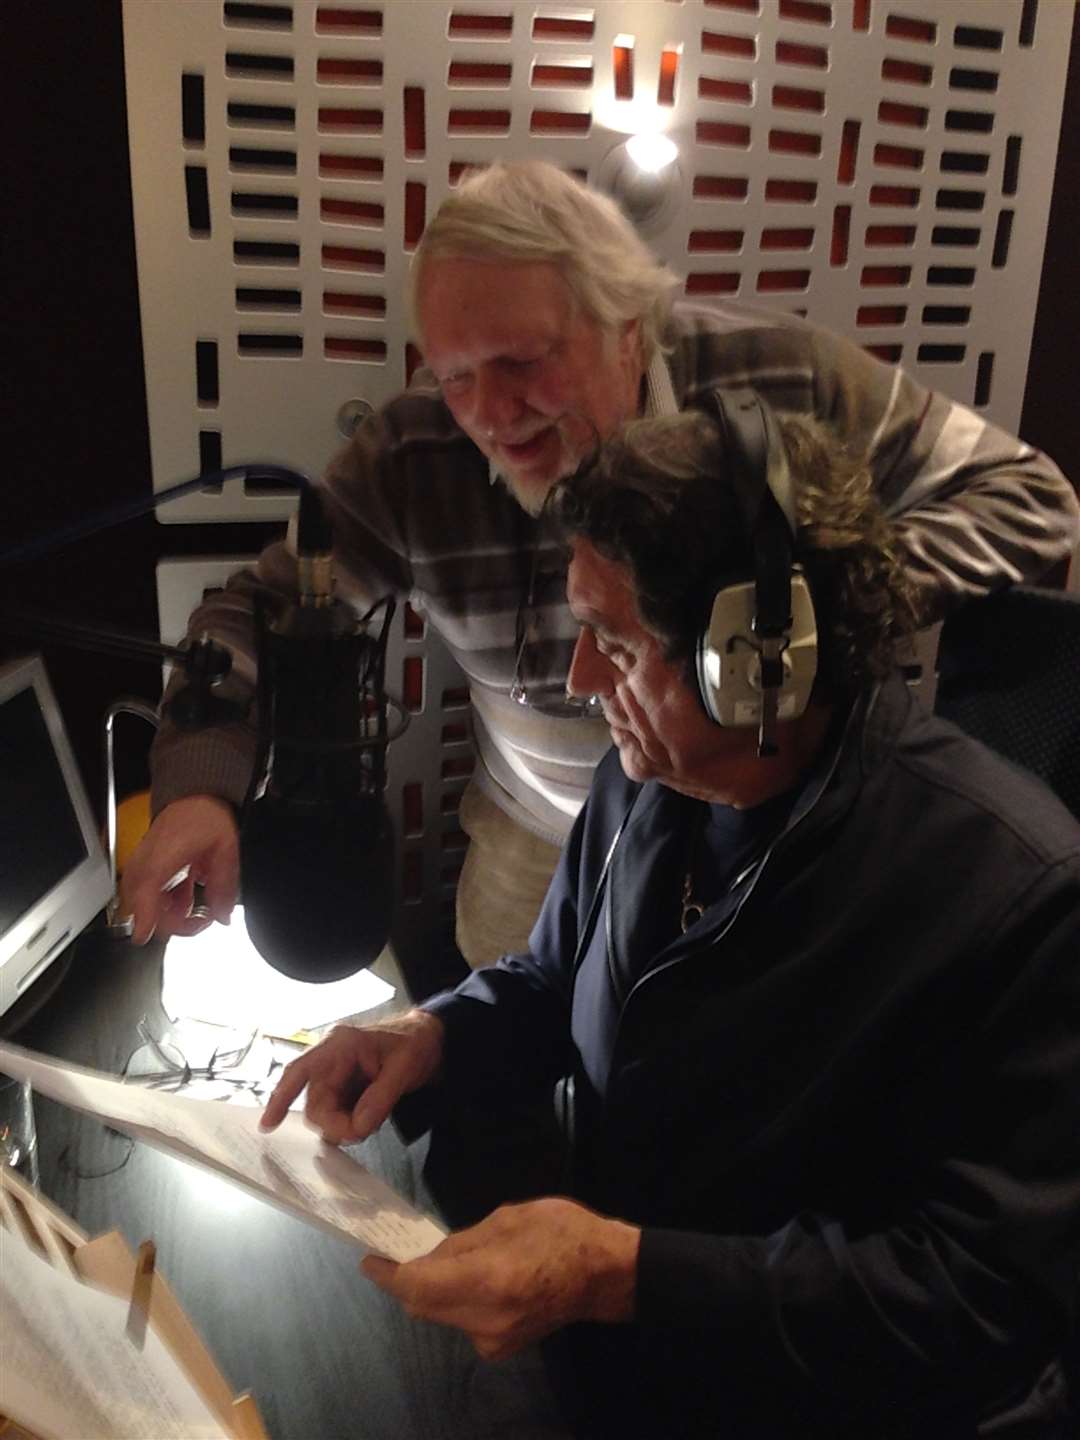 Ken Rowles and Ian McShane recording the voice-over for A Disaster Waiting To Happen